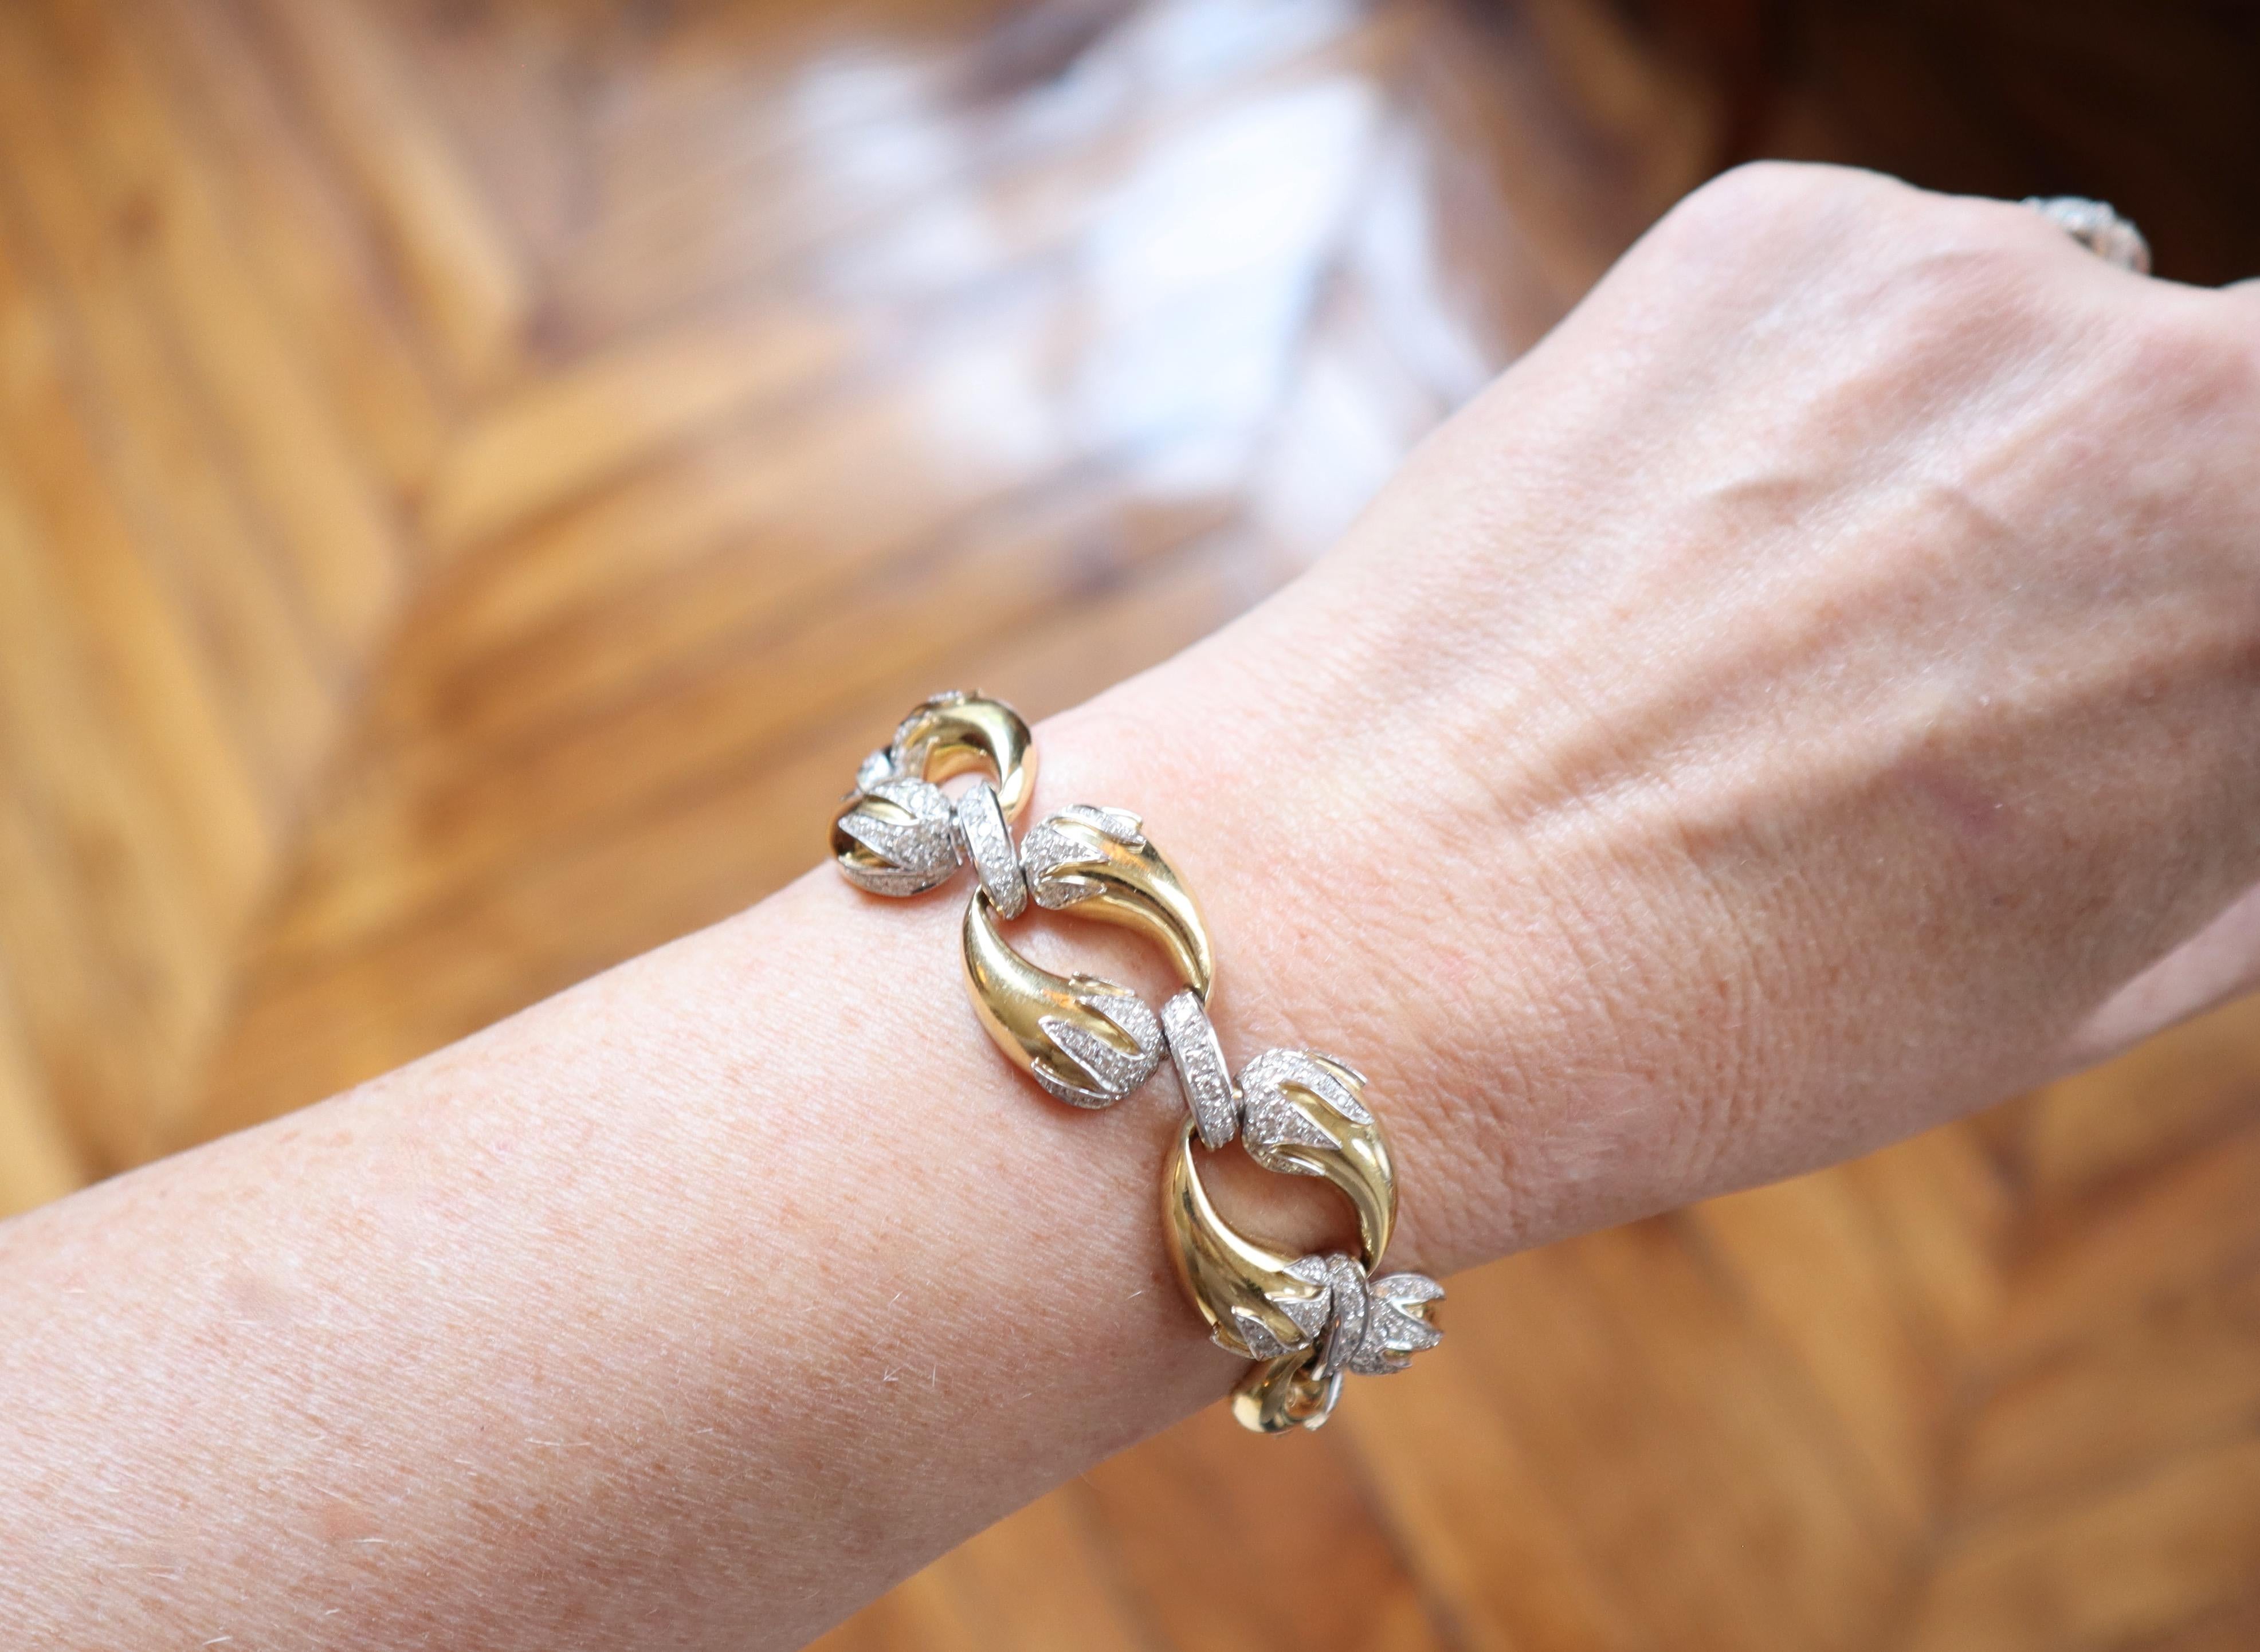 Horn of Abundance Bracelet circa 1960 in yellow and white Gold 18 Carat paved with Diamonds. The Bracelet is made up of rings composed of two Cornucopias head with white gold ends in white gold paved with Diamonds held together by passers in white